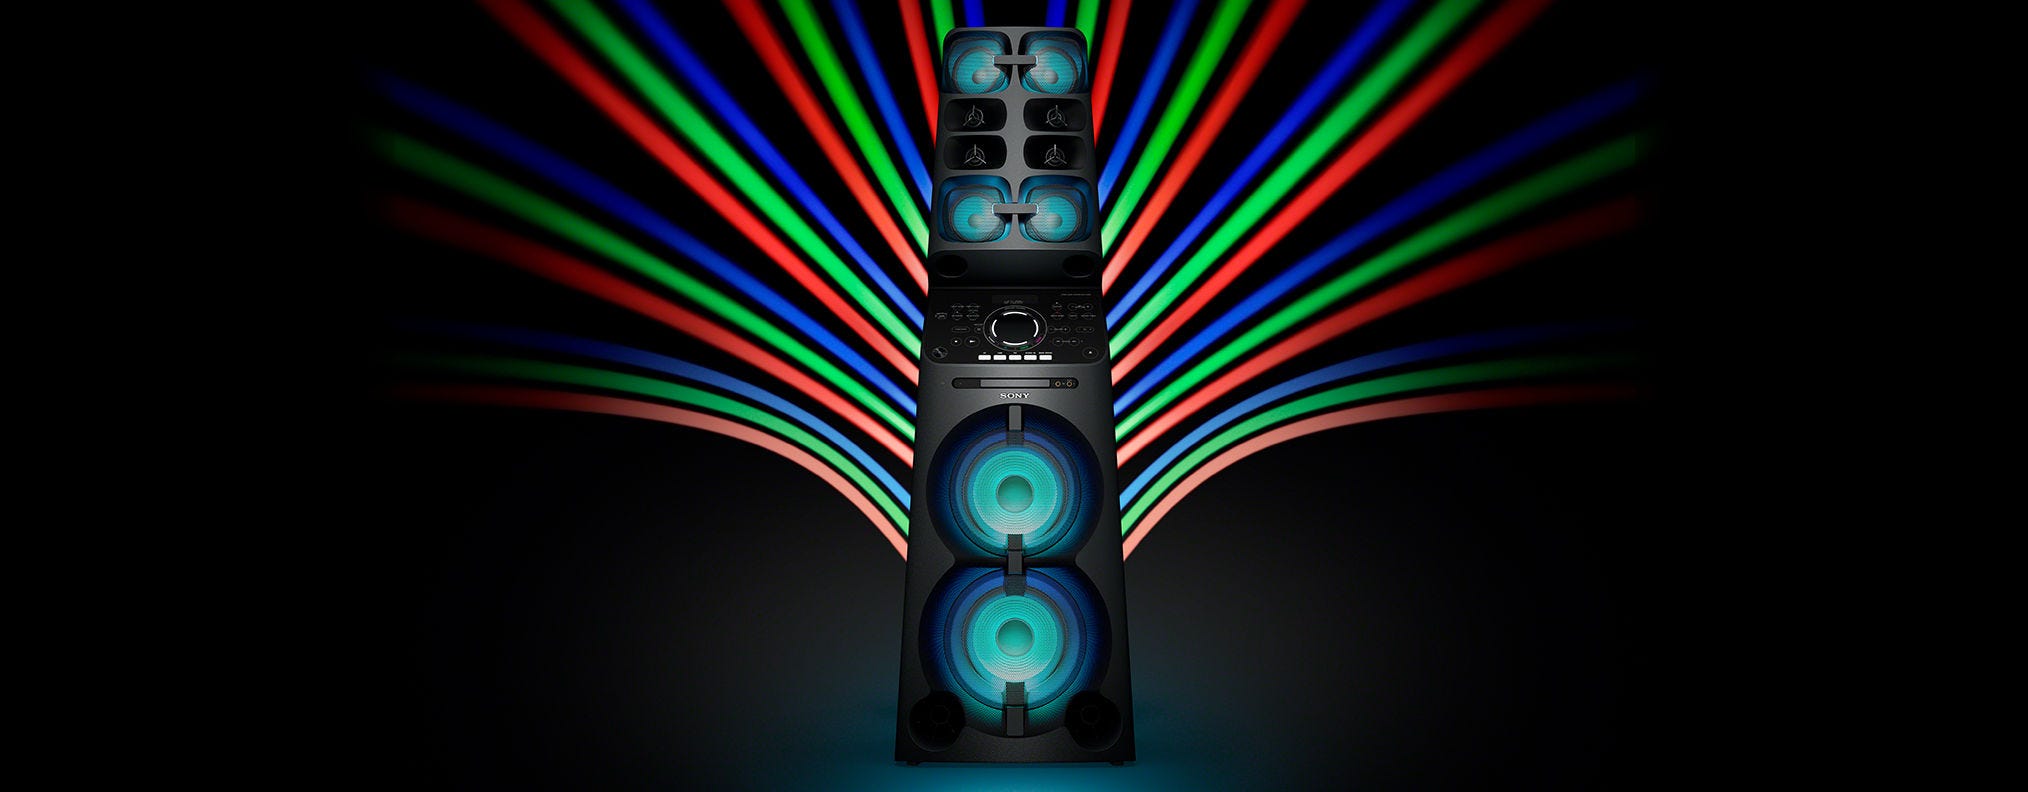 Hosting a block party? Sony has a 5.6ft speaker for that